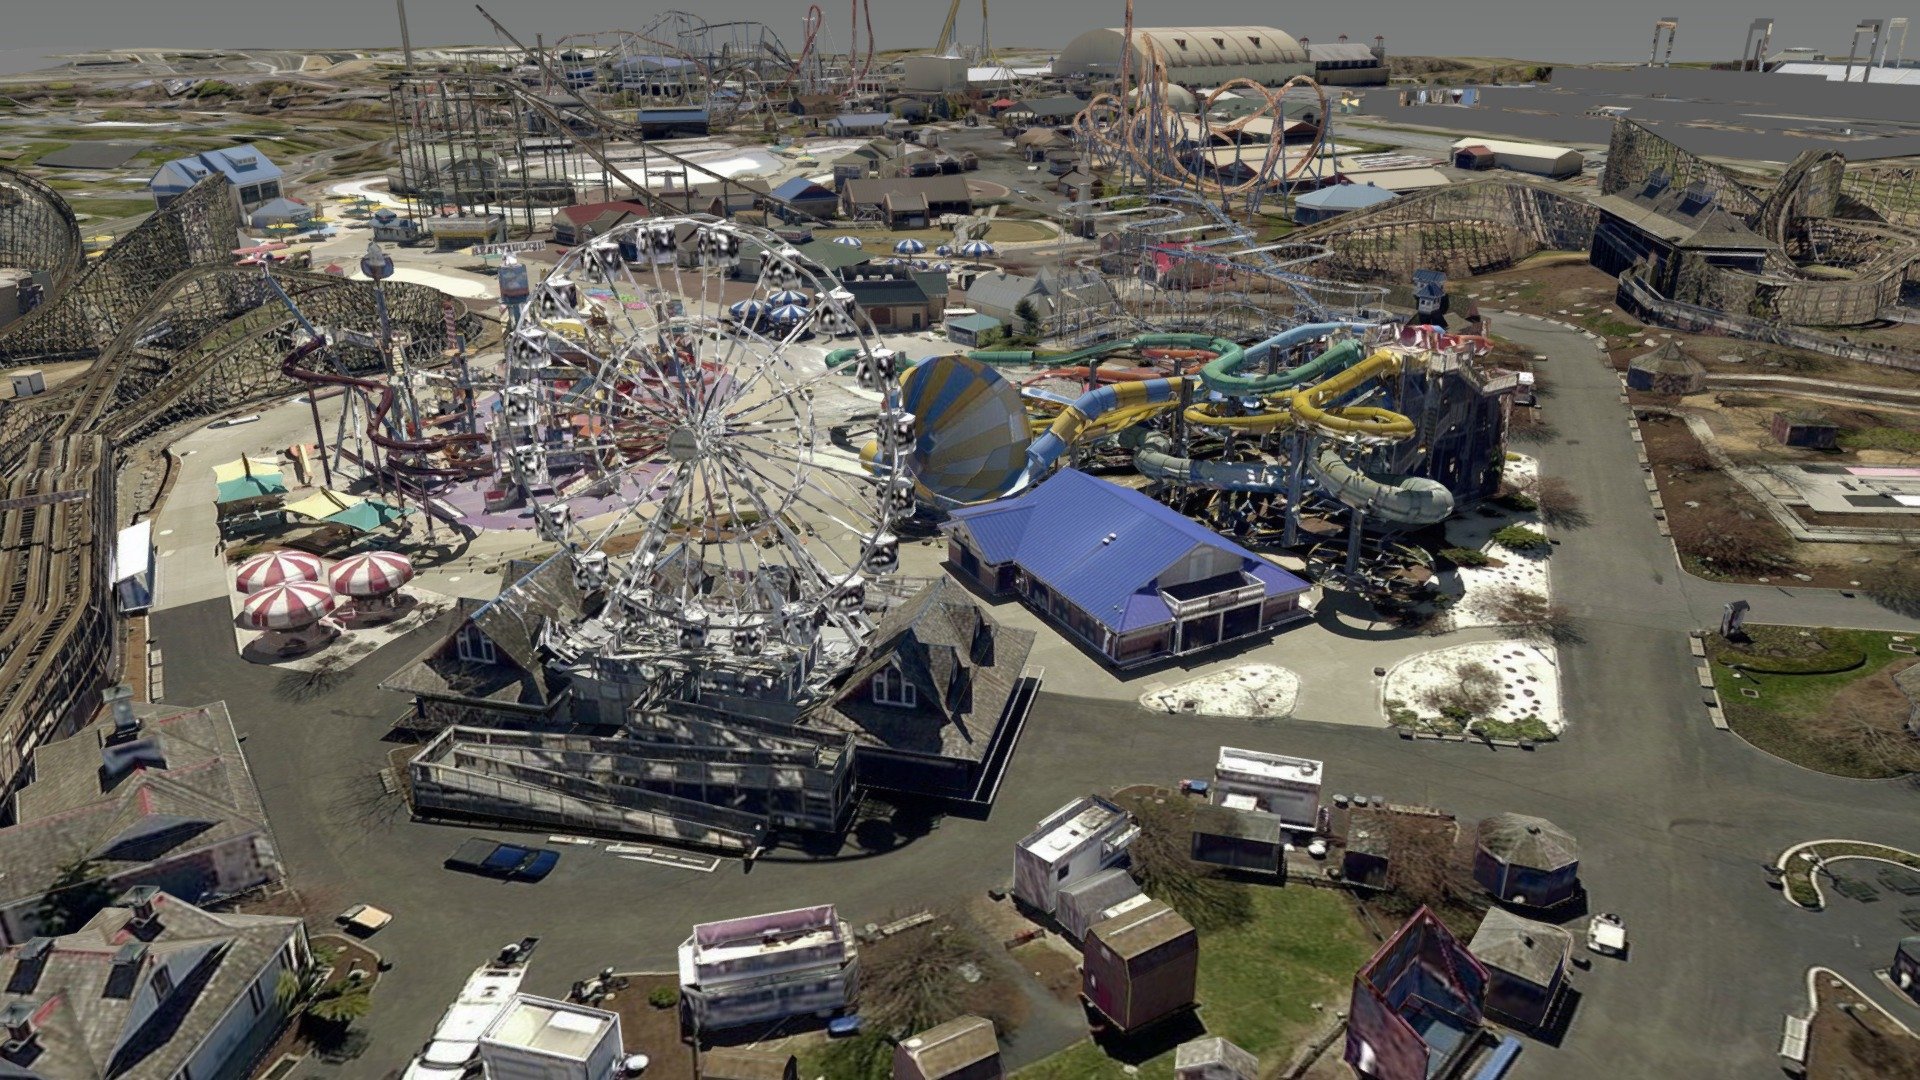 This is a photorealistic model of Hershey Park created by PLW Modelworks. 

PLW Modelworks is a provider of 3D city data for use in an array of industries including gaming, entertainment, GIS, simulation, and architecture 3d model